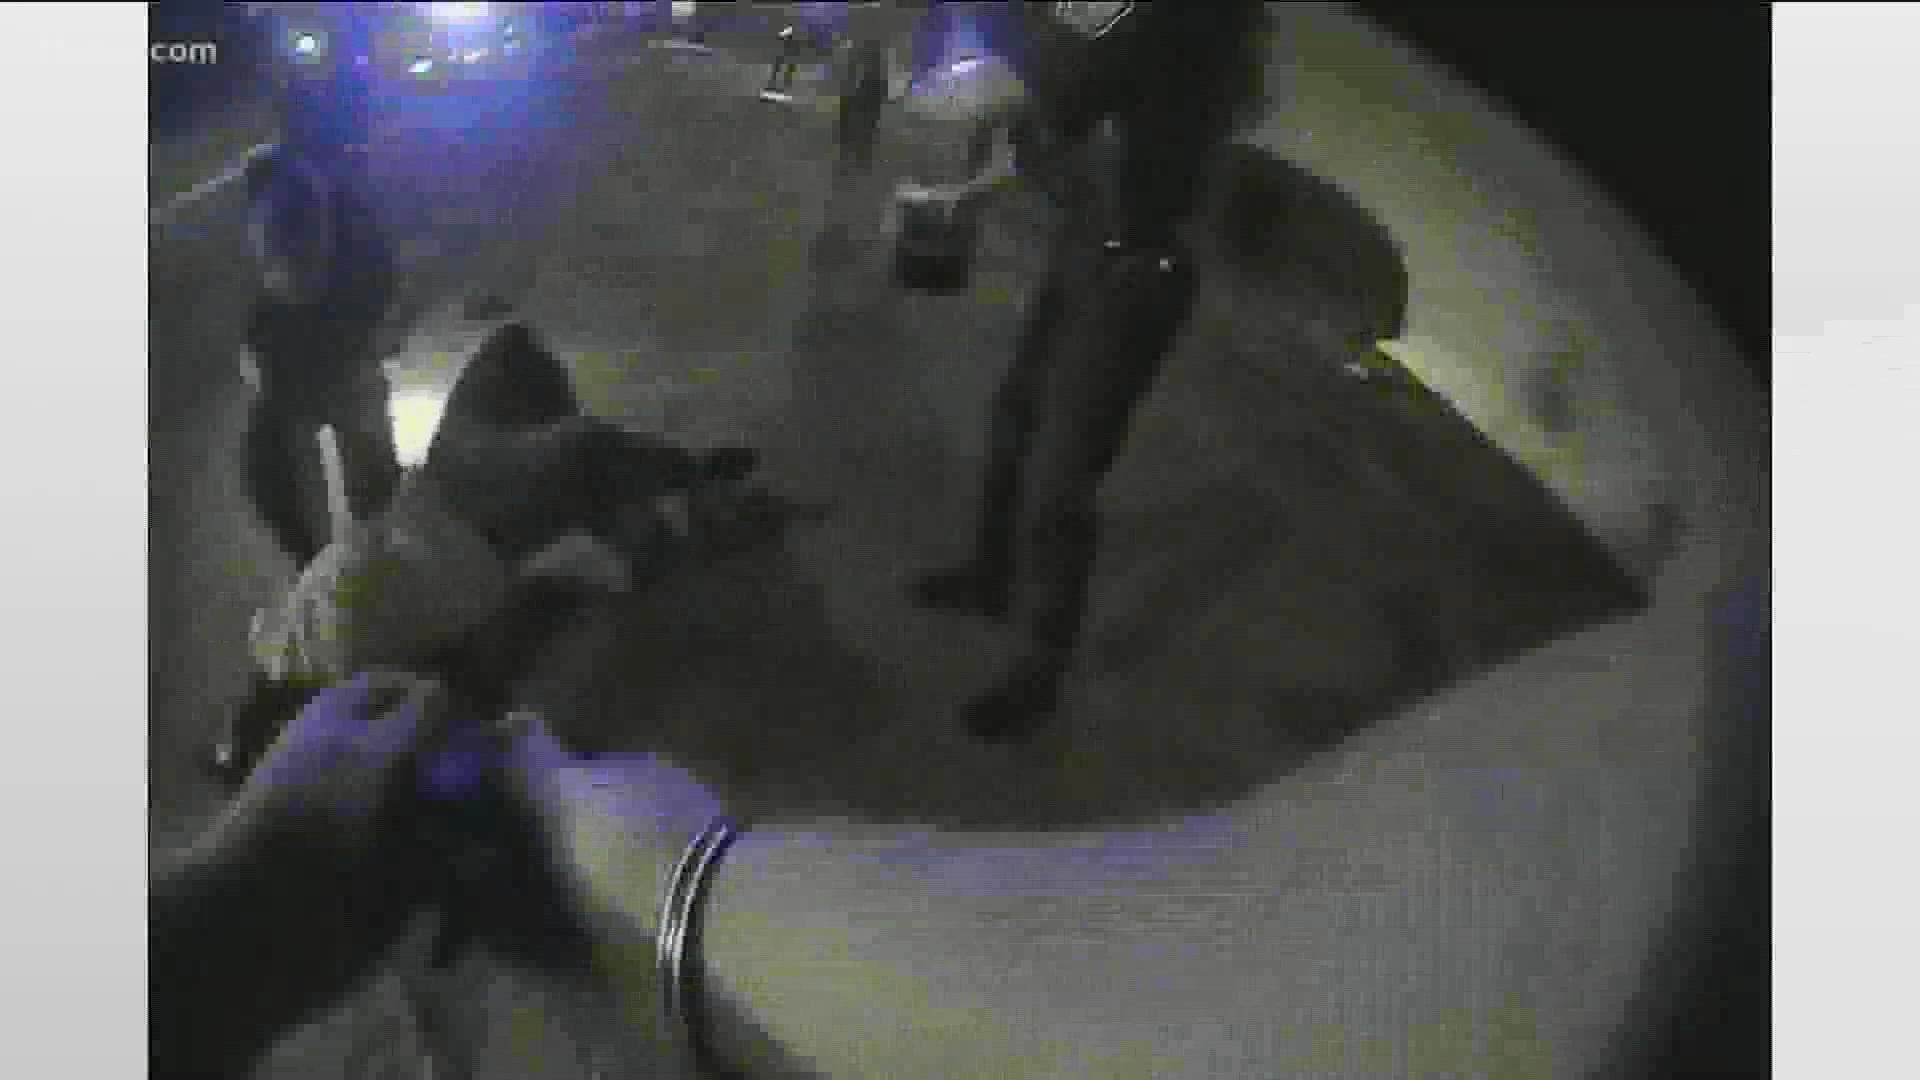 An officer Tased the man before shooting him.